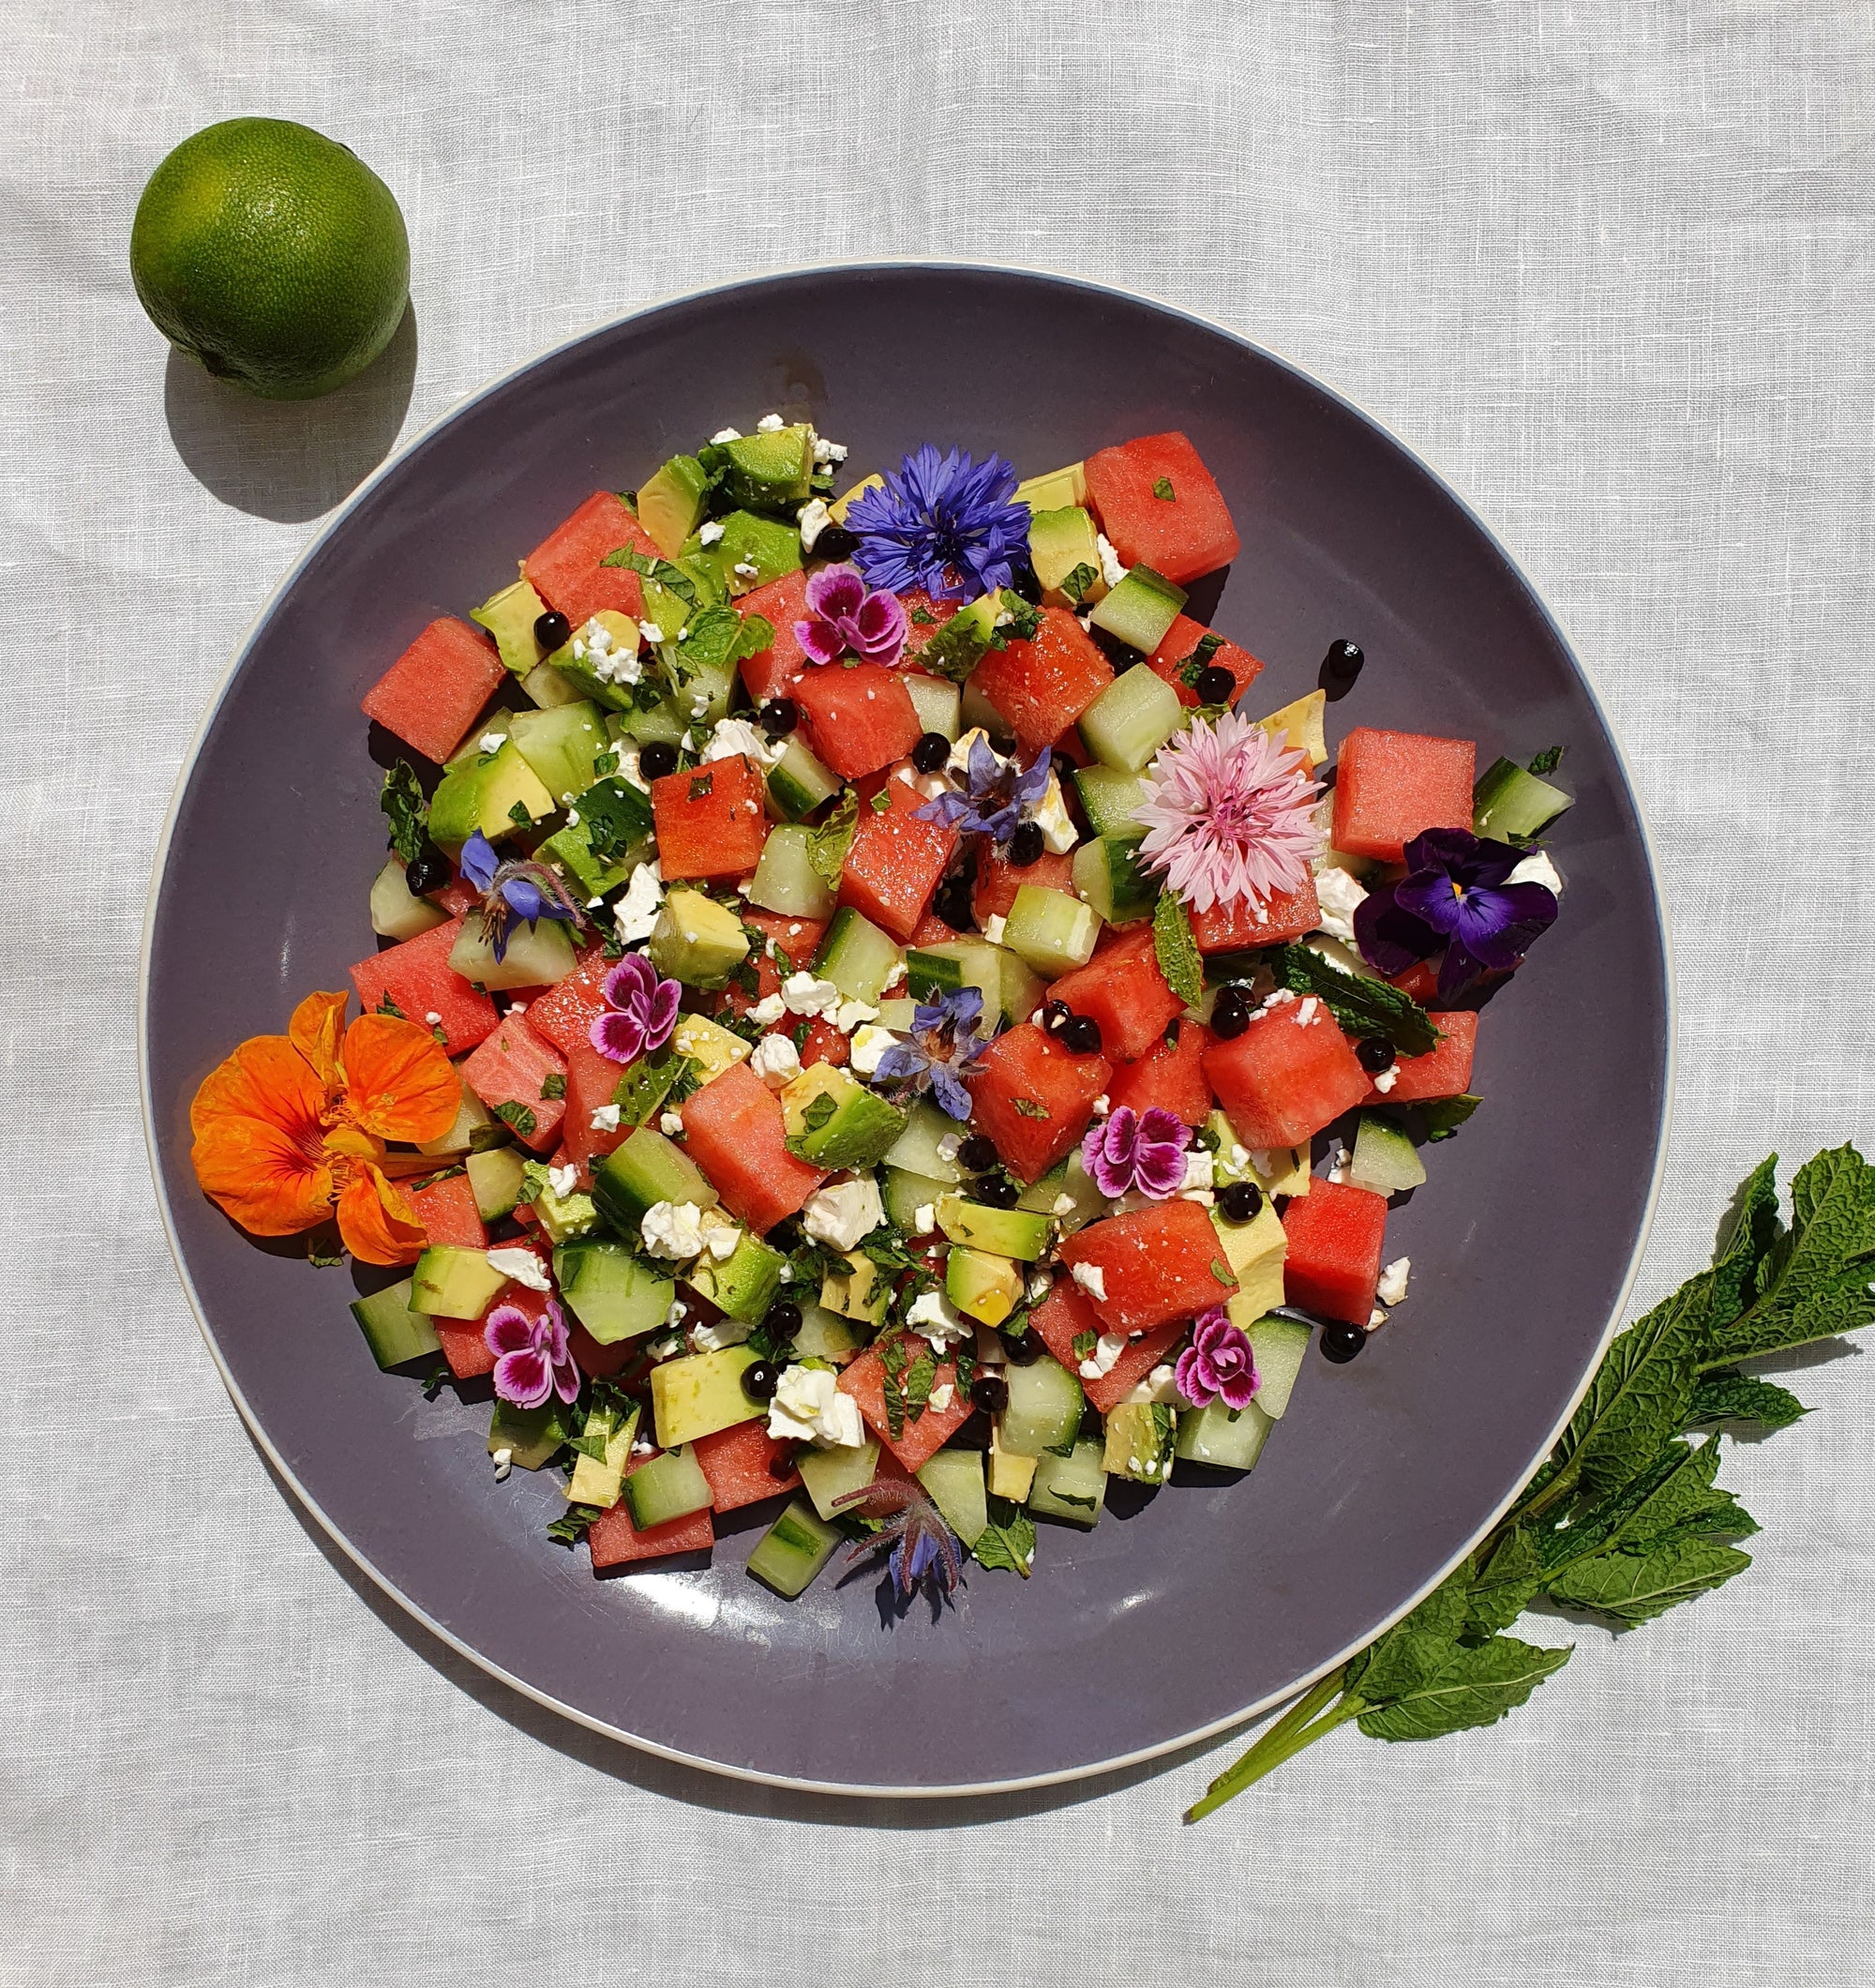 Watermelon salad with olive oil